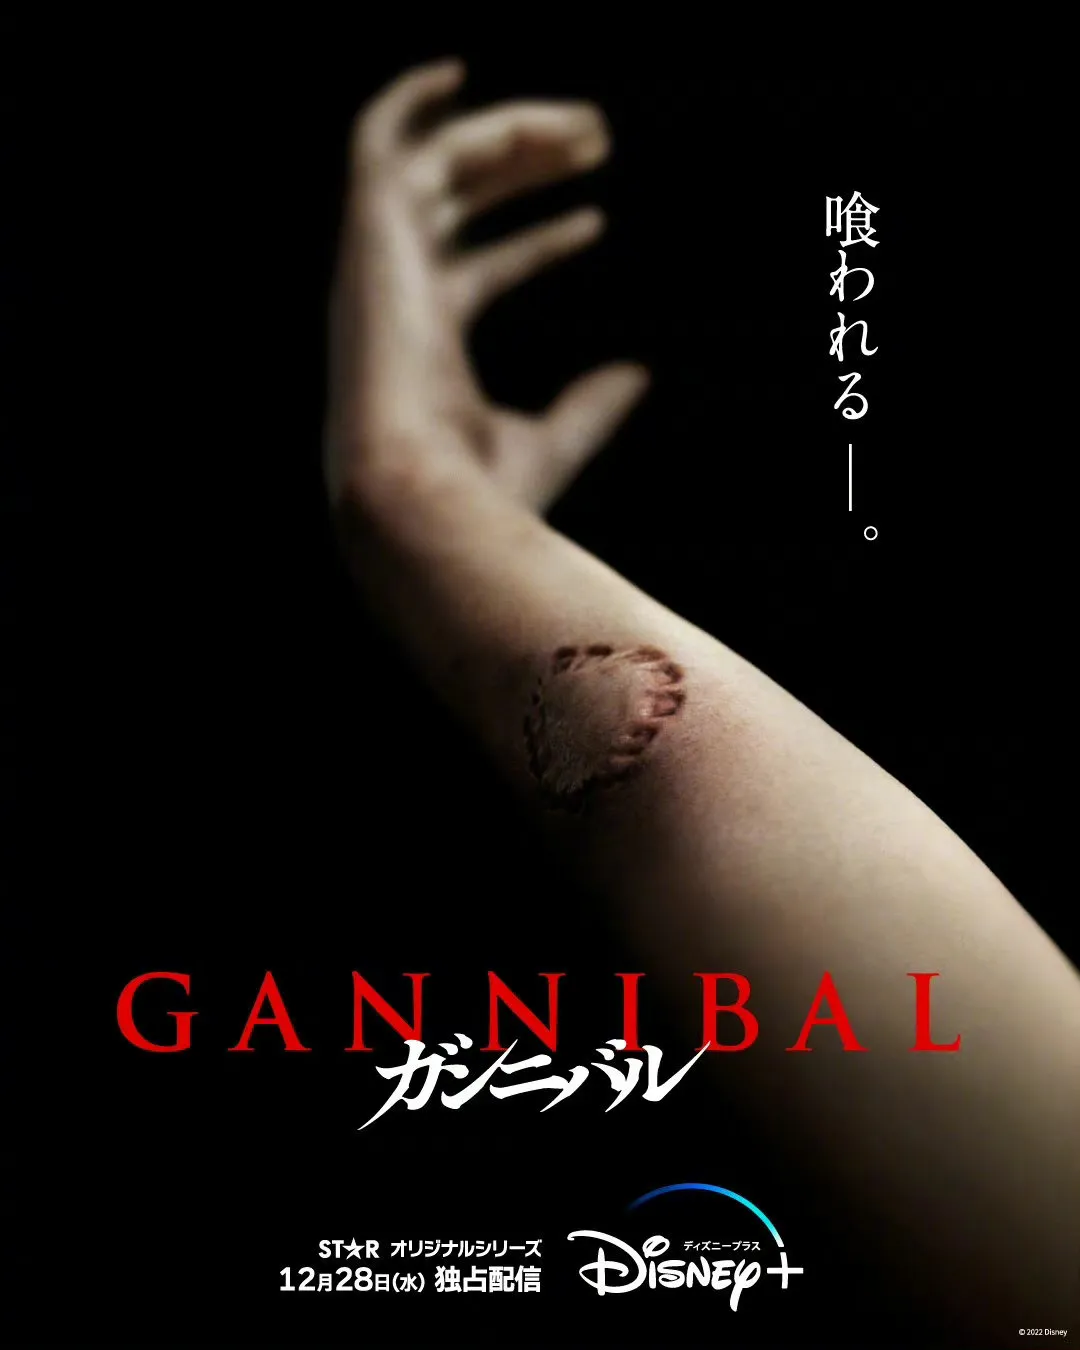 "Hannibal" exposes stills, Yûya Yagira's hands stained with blood, caught in a terrorist incident | FMV6